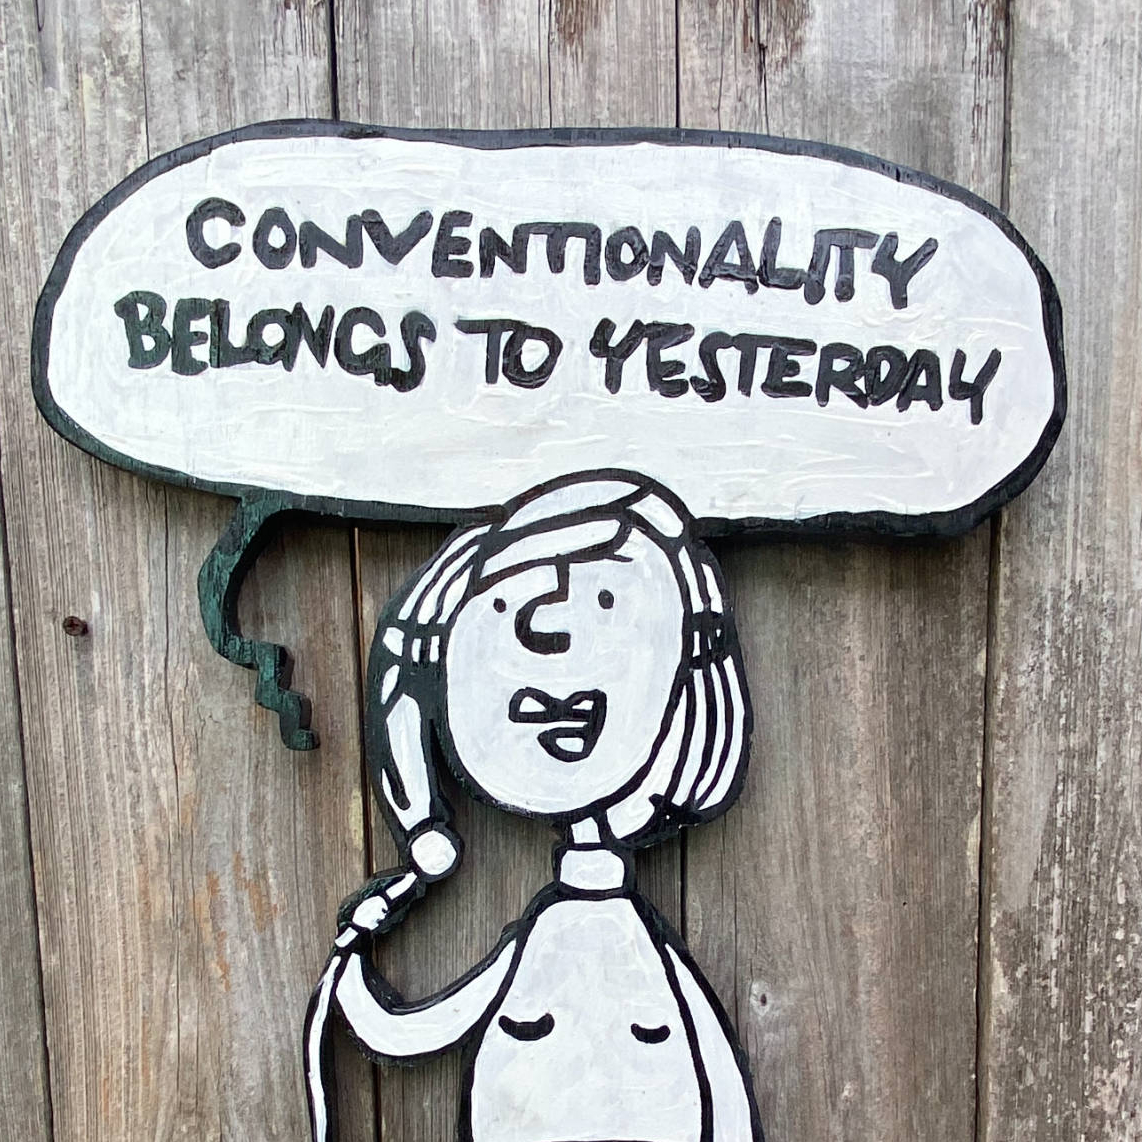 Conventionality Belongs To Yesterday